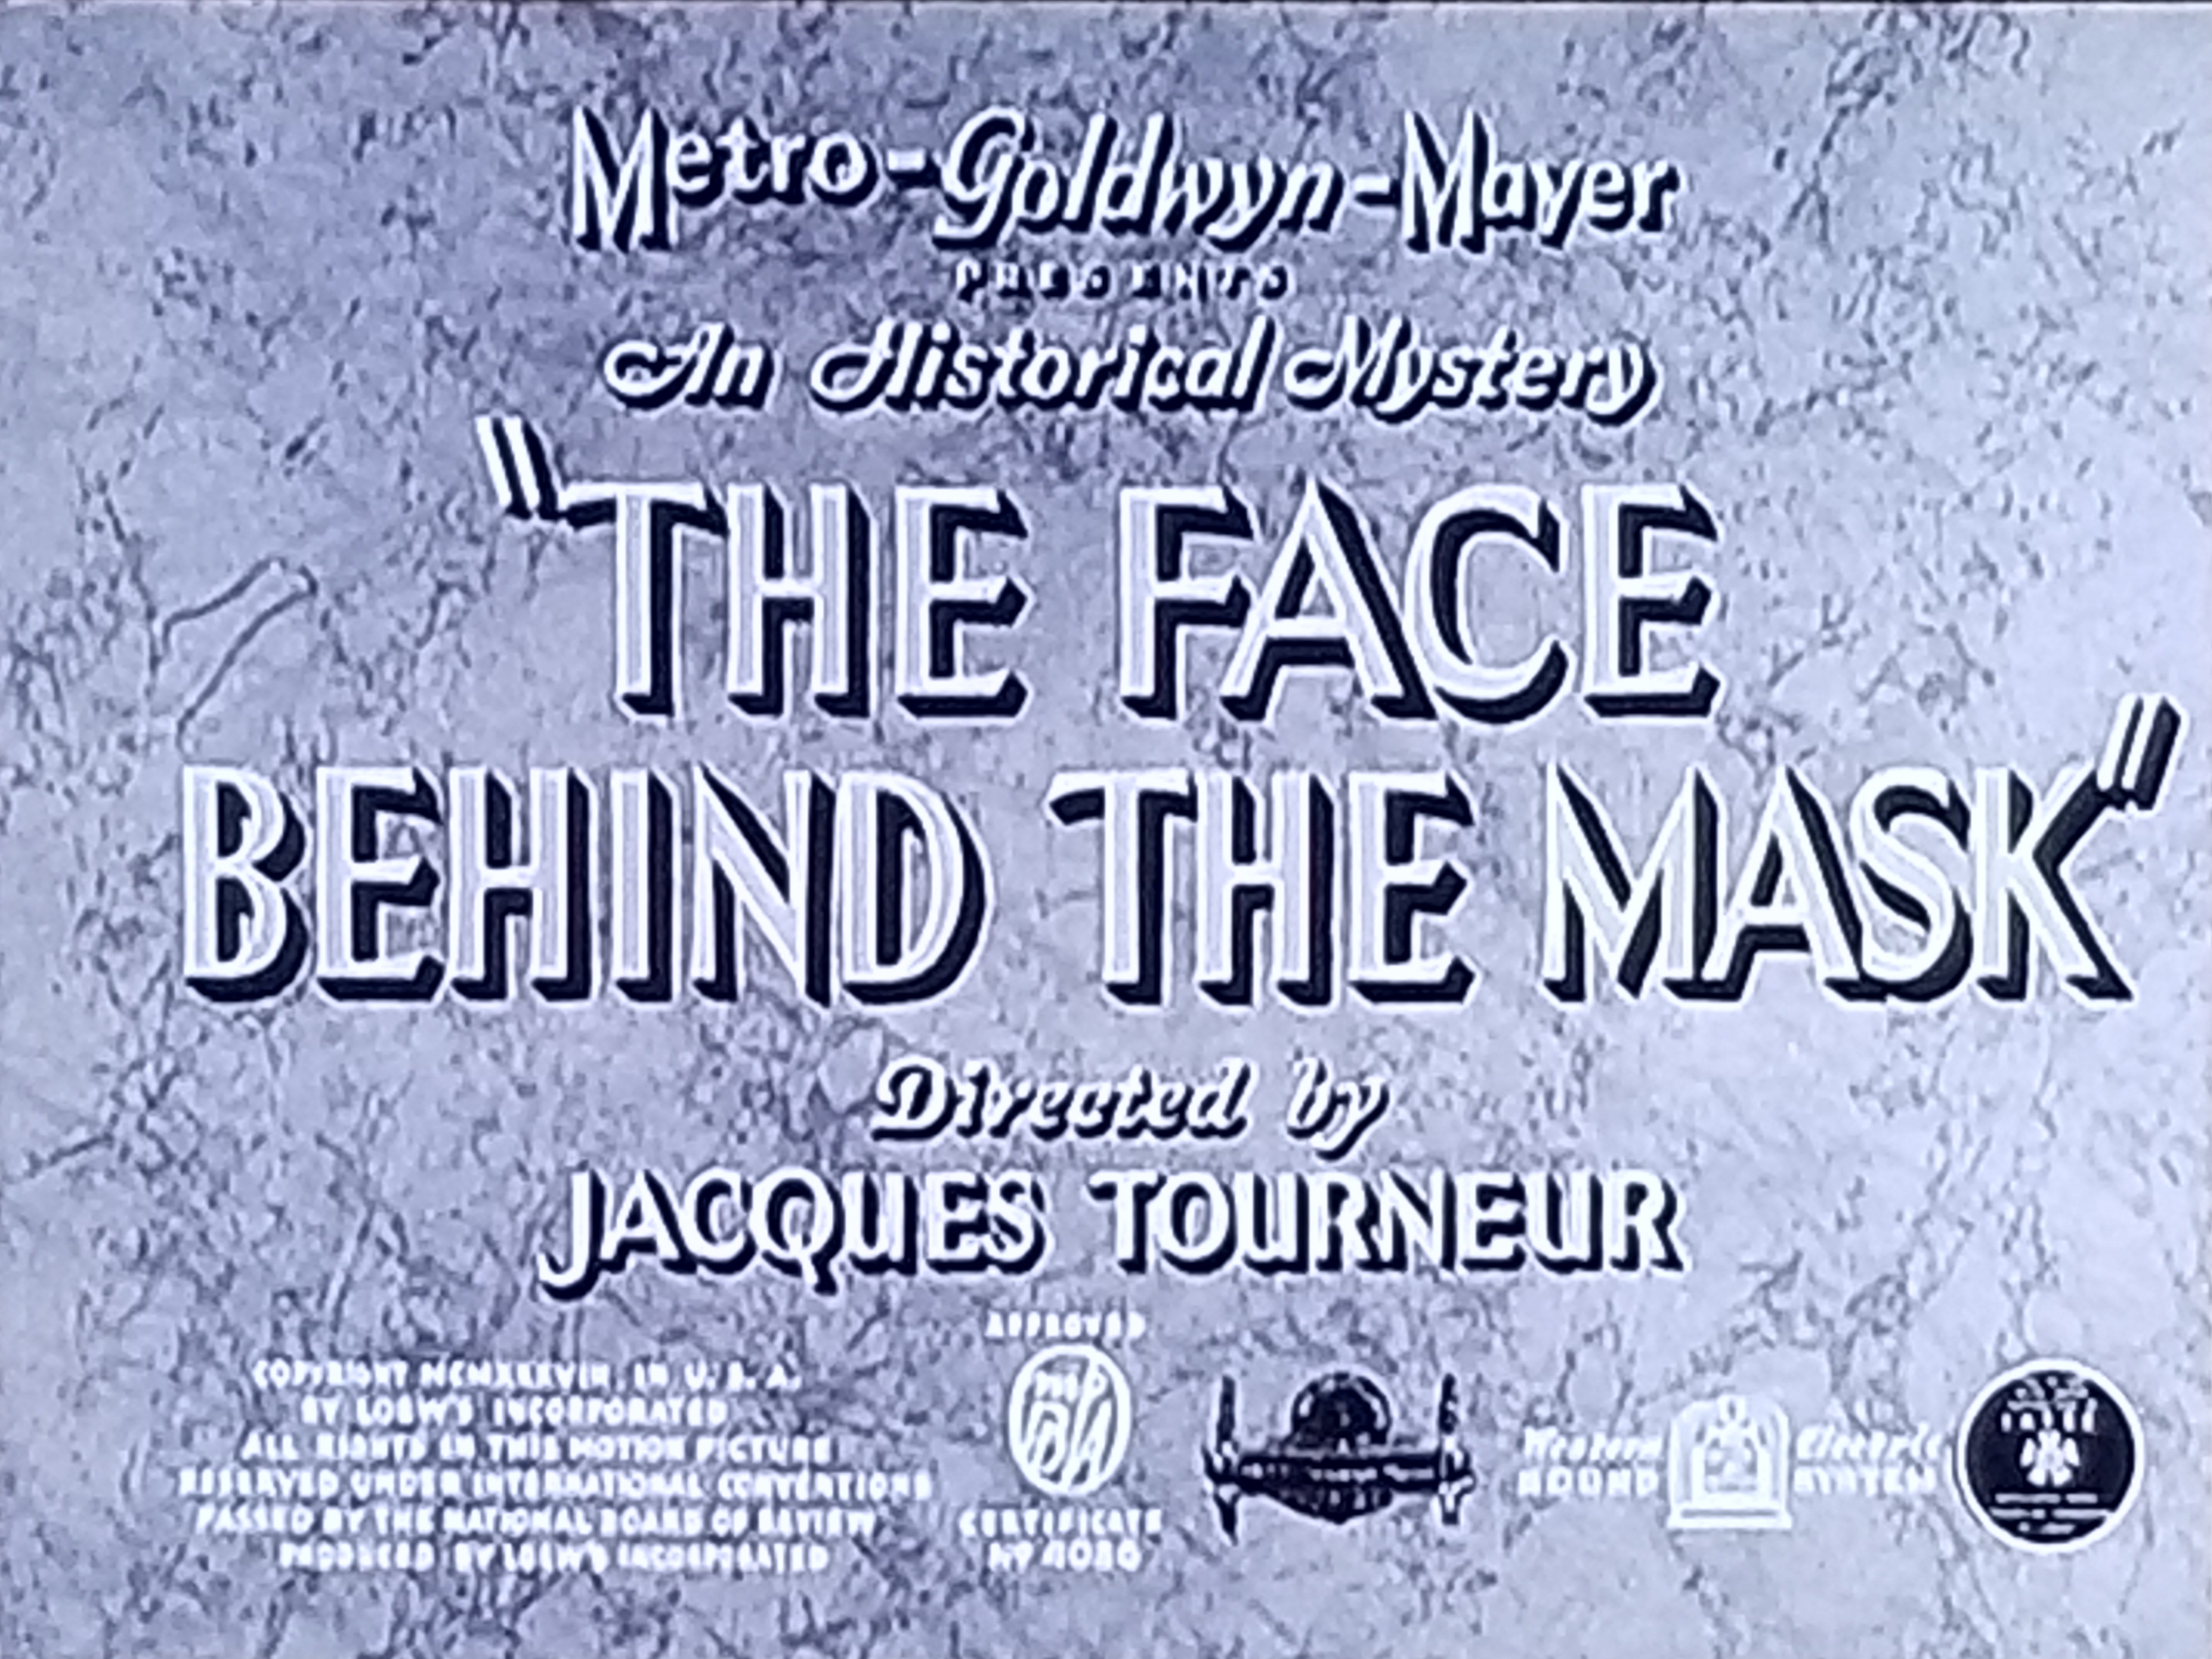 The Face Behind the Mask (1938) Screenshot 1